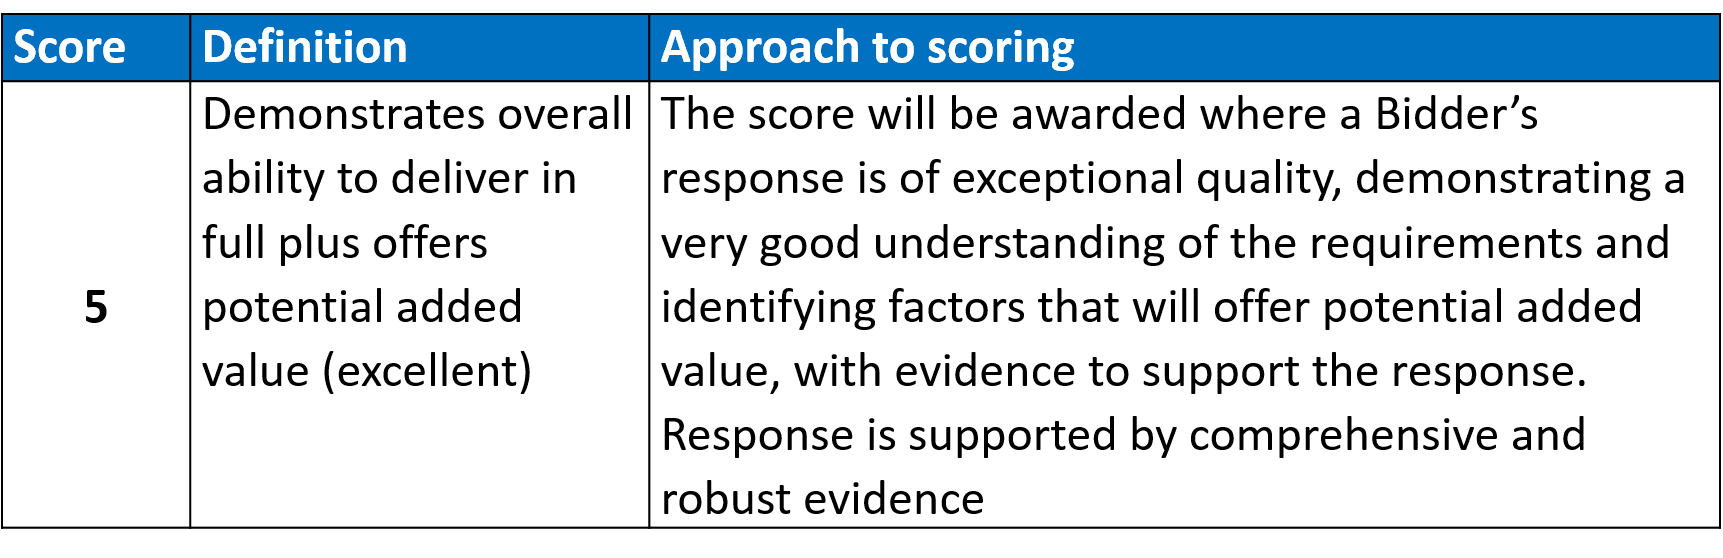 approach to scoring